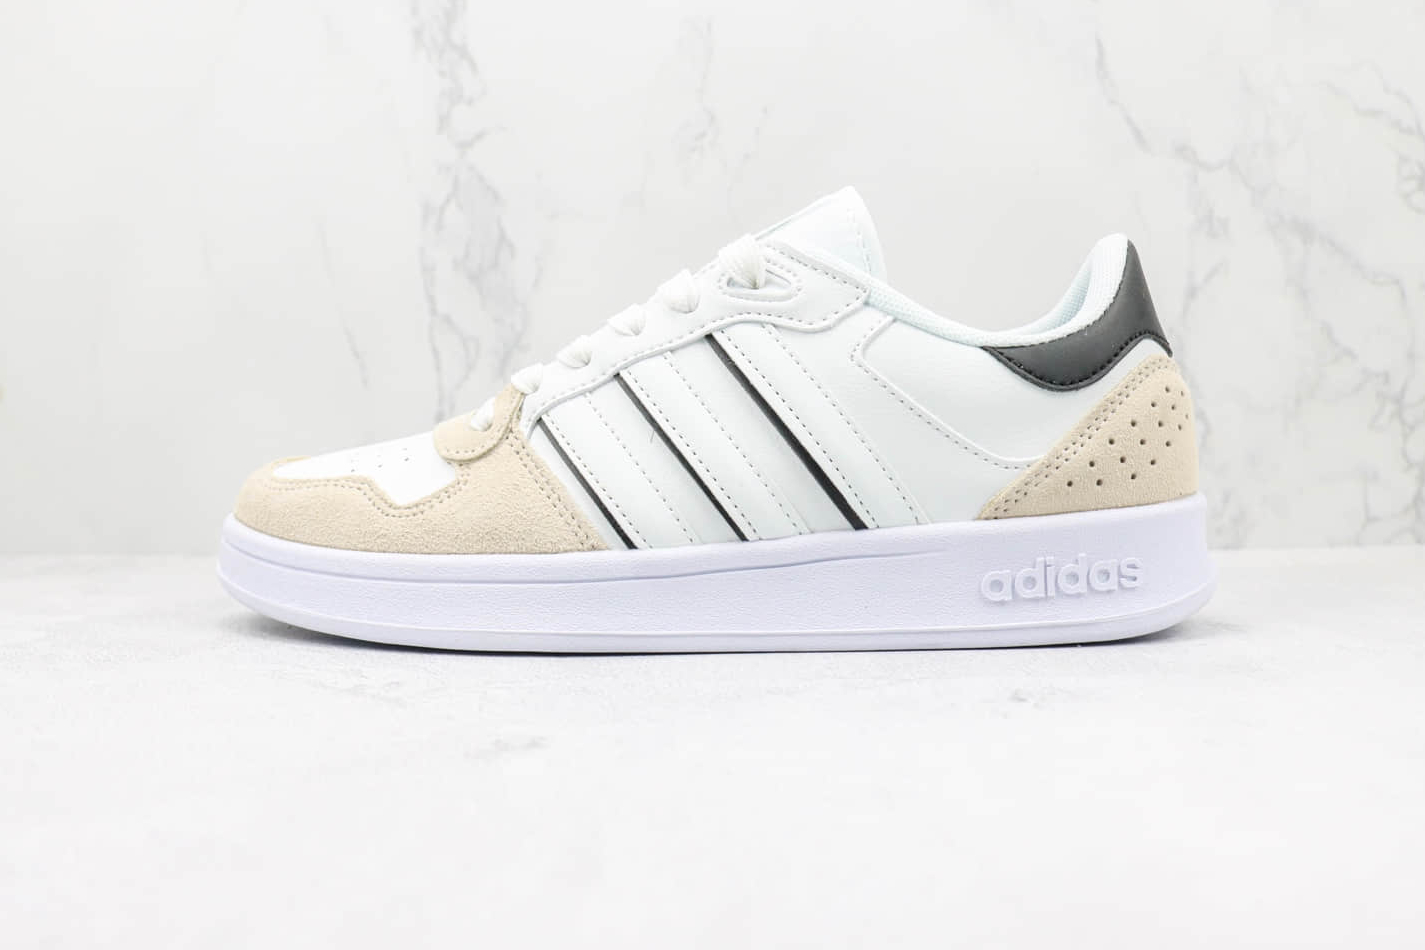 Adidas Neo Breaknet Plus FY5914: Stylish Sneakers for Every Occasion